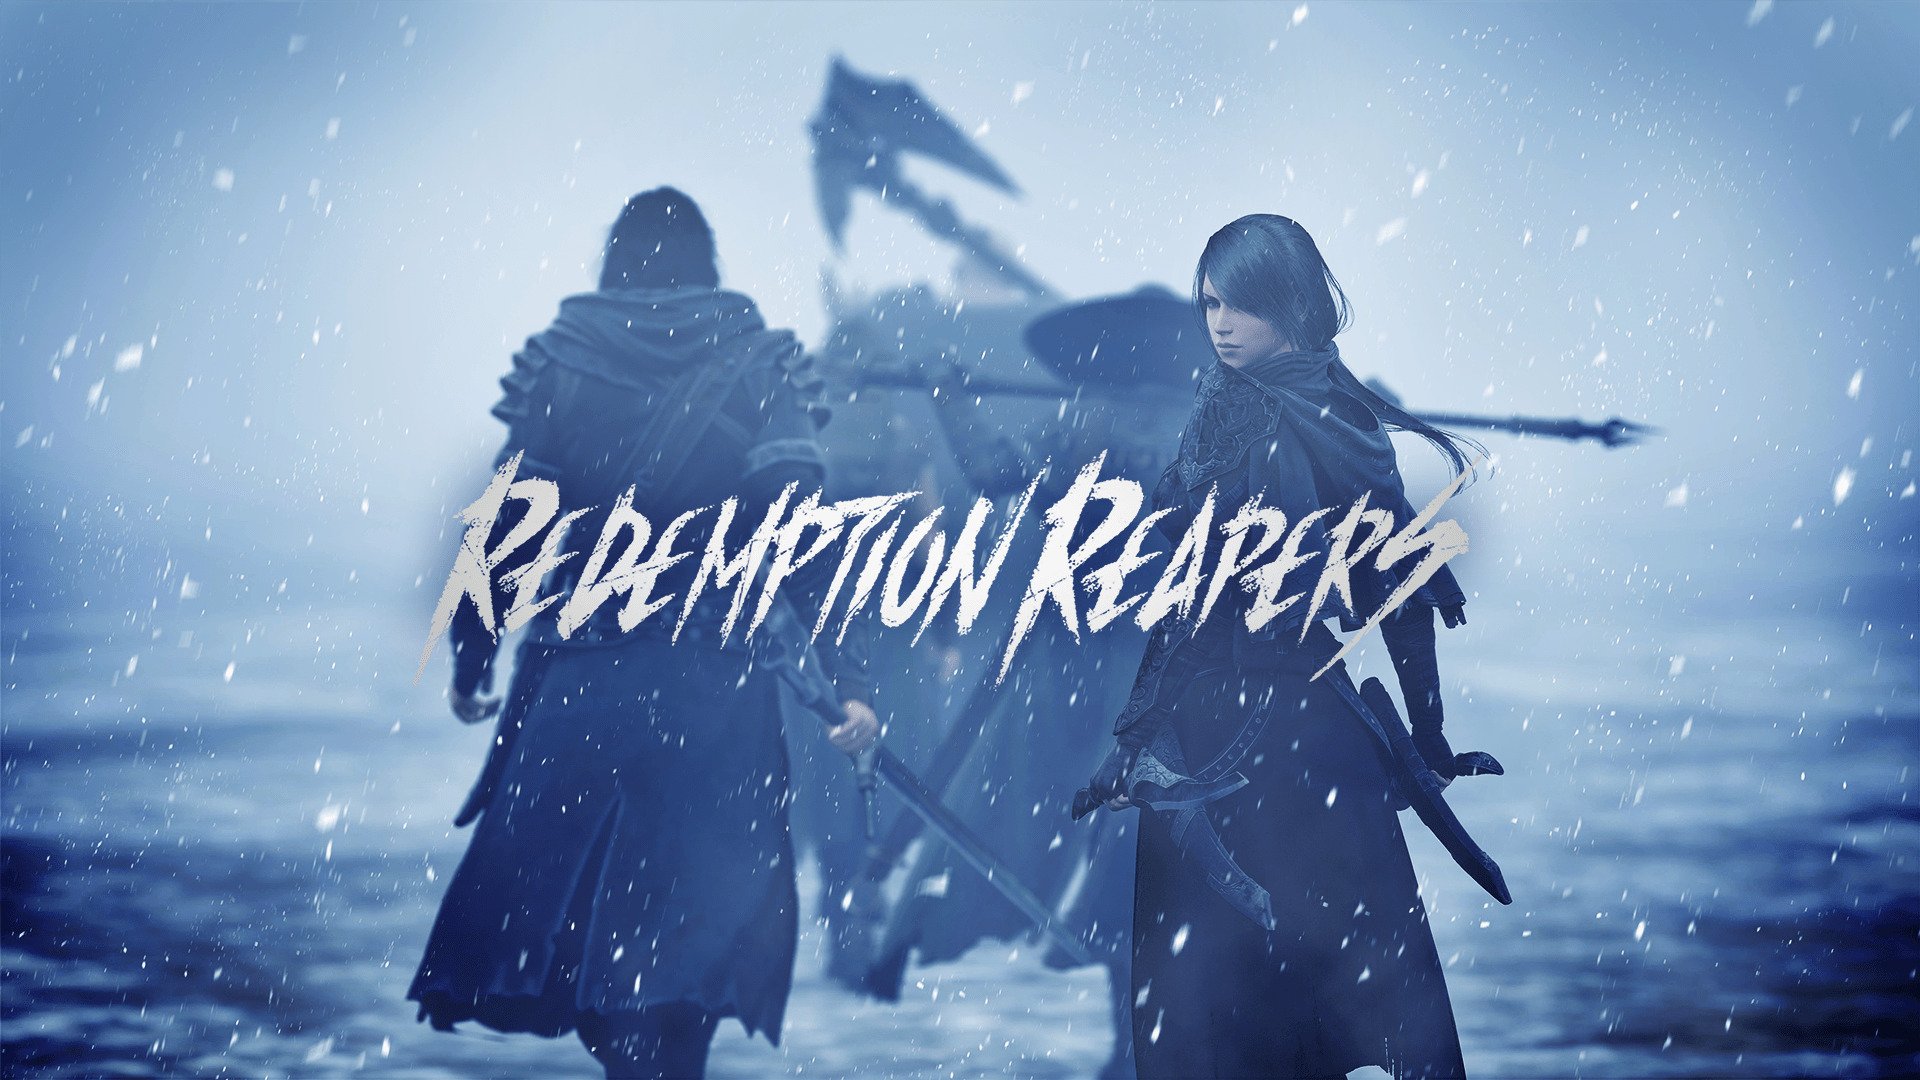 Binary Haze Interactive and Adglobe announce strategy RPG Redemption Reapers for PS Switch, and PC